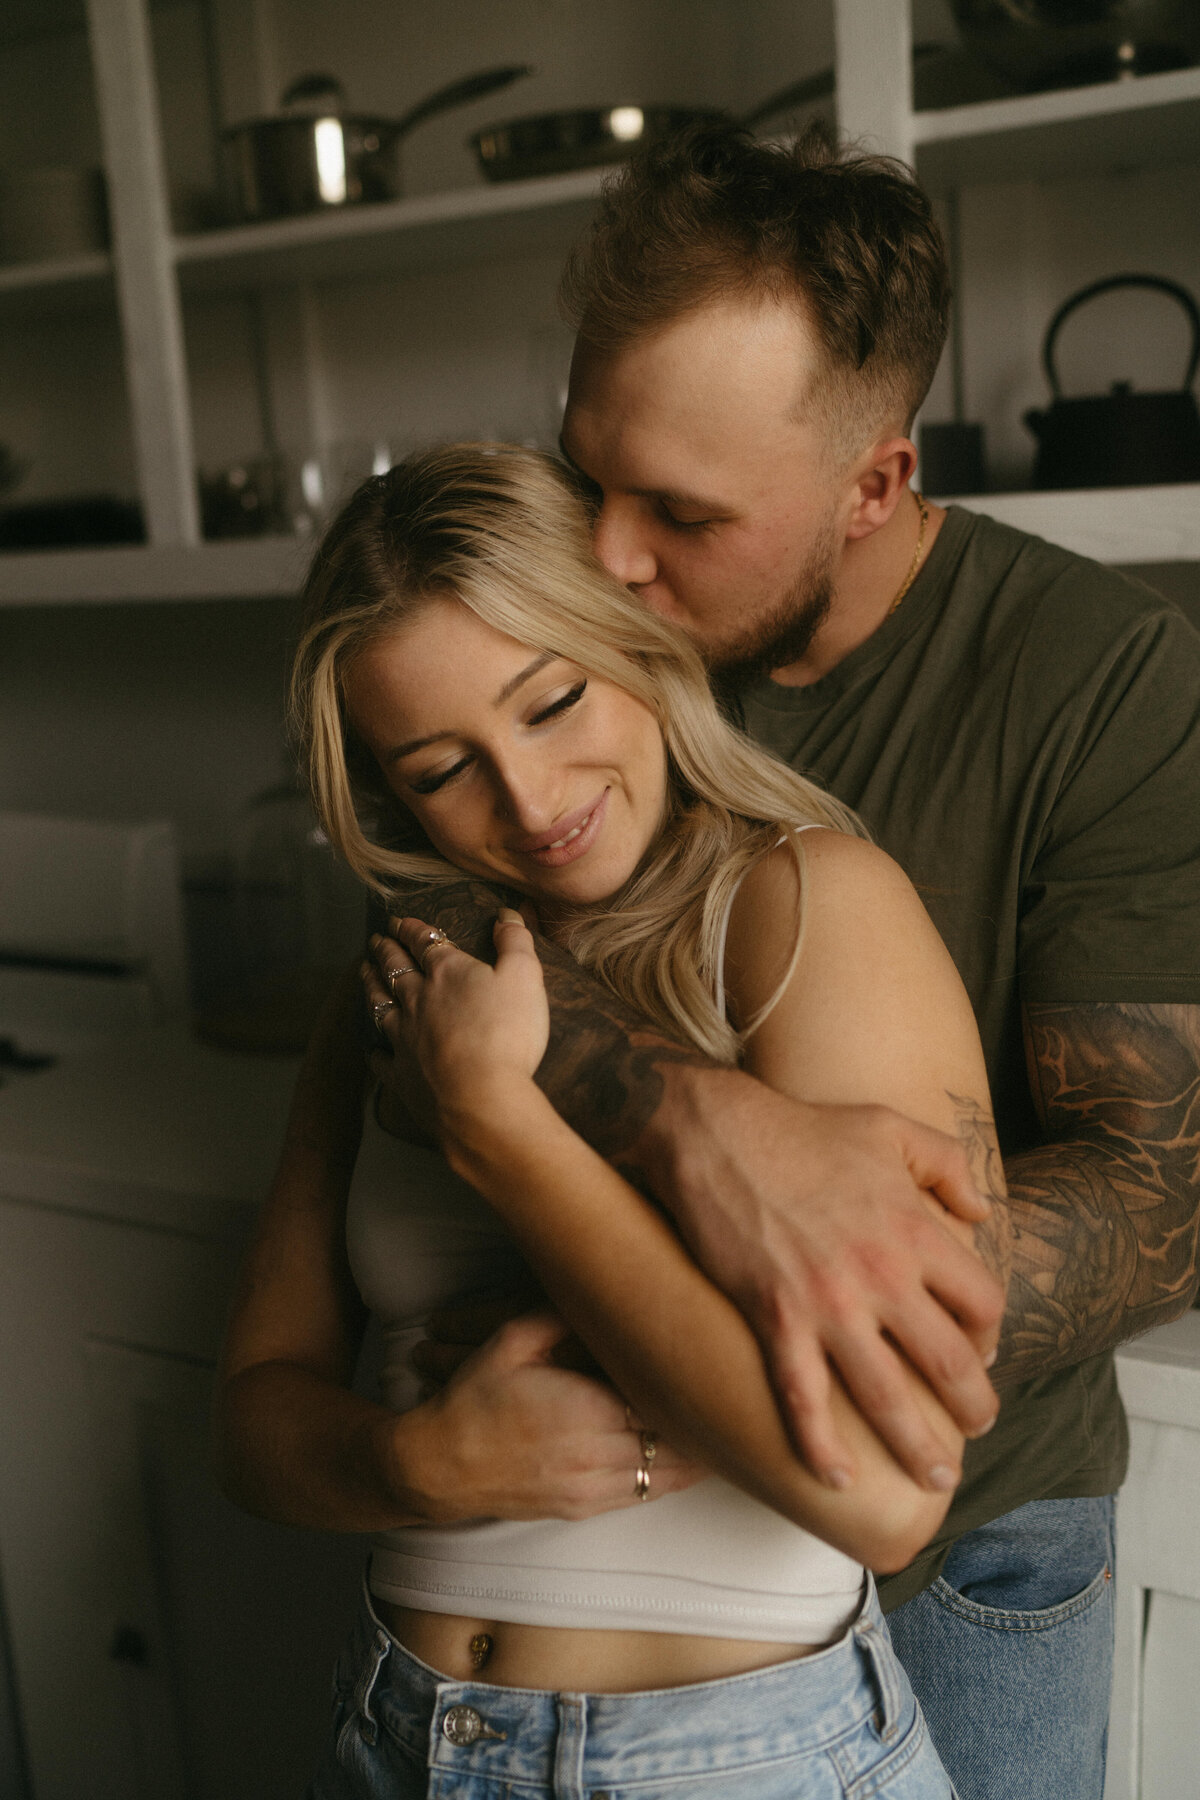 vancouver-island-documentary-candid-style-engagement-photographer-taylor-dawning-photography-rook-and-rose-loft-victoria-bc-114